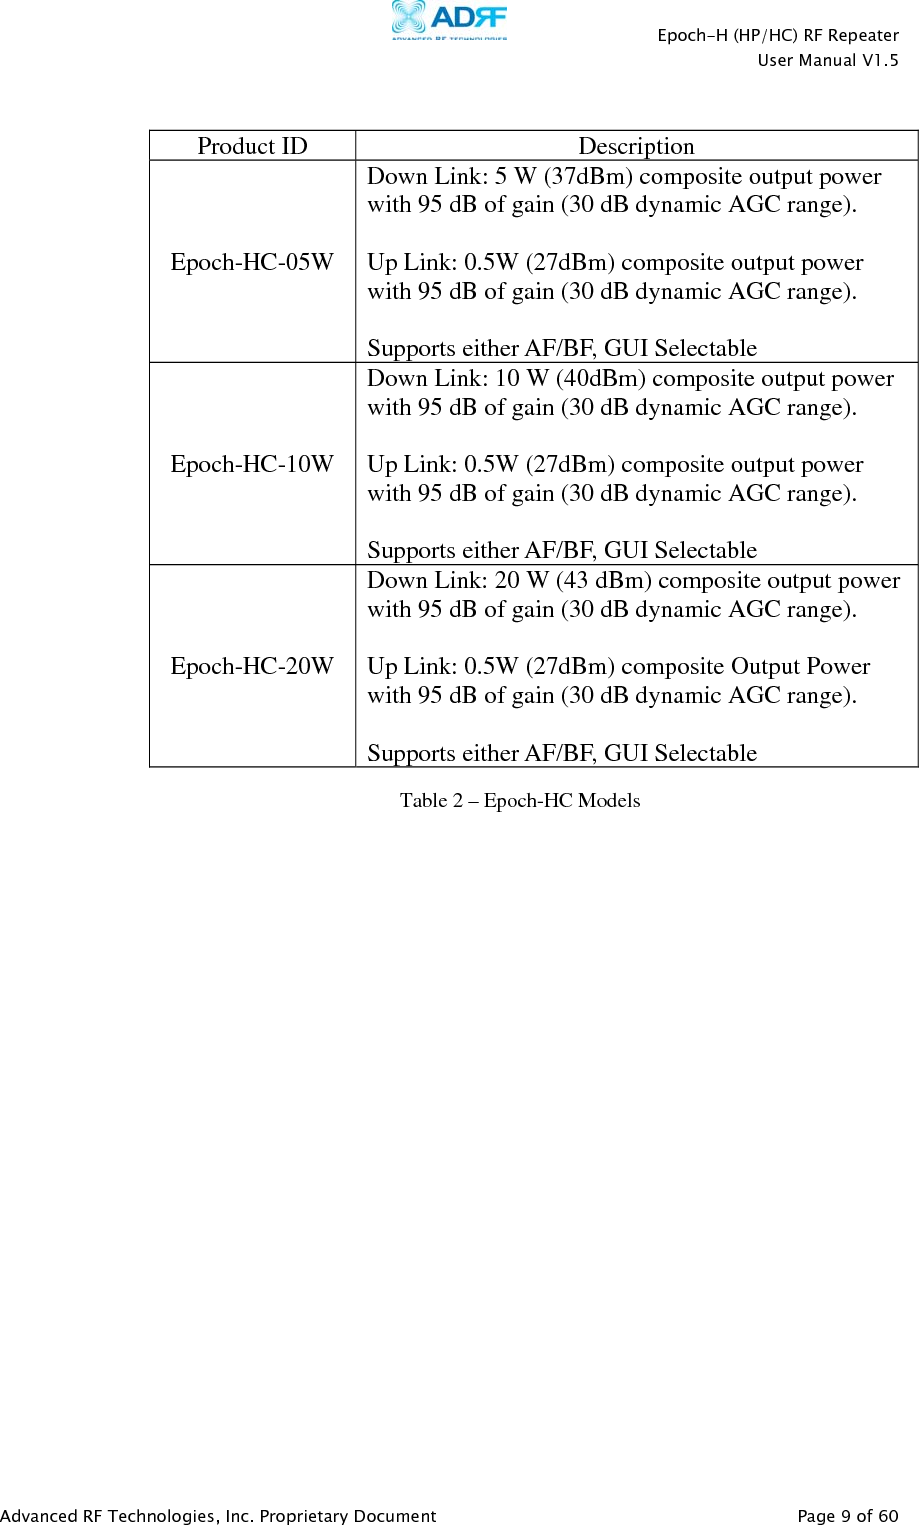    Epoch-H (HP/HC) RF Repeater  User Manual V1.5  Advanced RF Technologies, Inc. Proprietary Document   Page 9 of 60    Product ID  Description Epoch-HC-05W Down Link: 5 W (37dBm) composite output power with 95 dB of gain (30 dB dynamic AGC range).  Up Link: 0.5W (27dBm) composite output power with 95 dB of gain (30 dB dynamic AGC range).  Supports either AF/BF, GUI Selectable Epoch-HC-10W Down Link: 10 W (40dBm) composite output power with 95 dB of gain (30 dB dynamic AGC range).  Up Link: 0.5W (27dBm) composite output power with 95 dB of gain (30 dB dynamic AGC range).  Supports either AF/BF, GUI Selectable Epoch-HC-20W Down Link: 20 W (43 dBm) composite output power with 95 dB of gain (30 dB dynamic AGC range).  Up Link: 0.5W (27dBm) composite Output Power with 95 dB of gain (30 dB dynamic AGC range).  Supports either AF/BF, GUI Selectable    Table 2 – Epoch-HC Models 